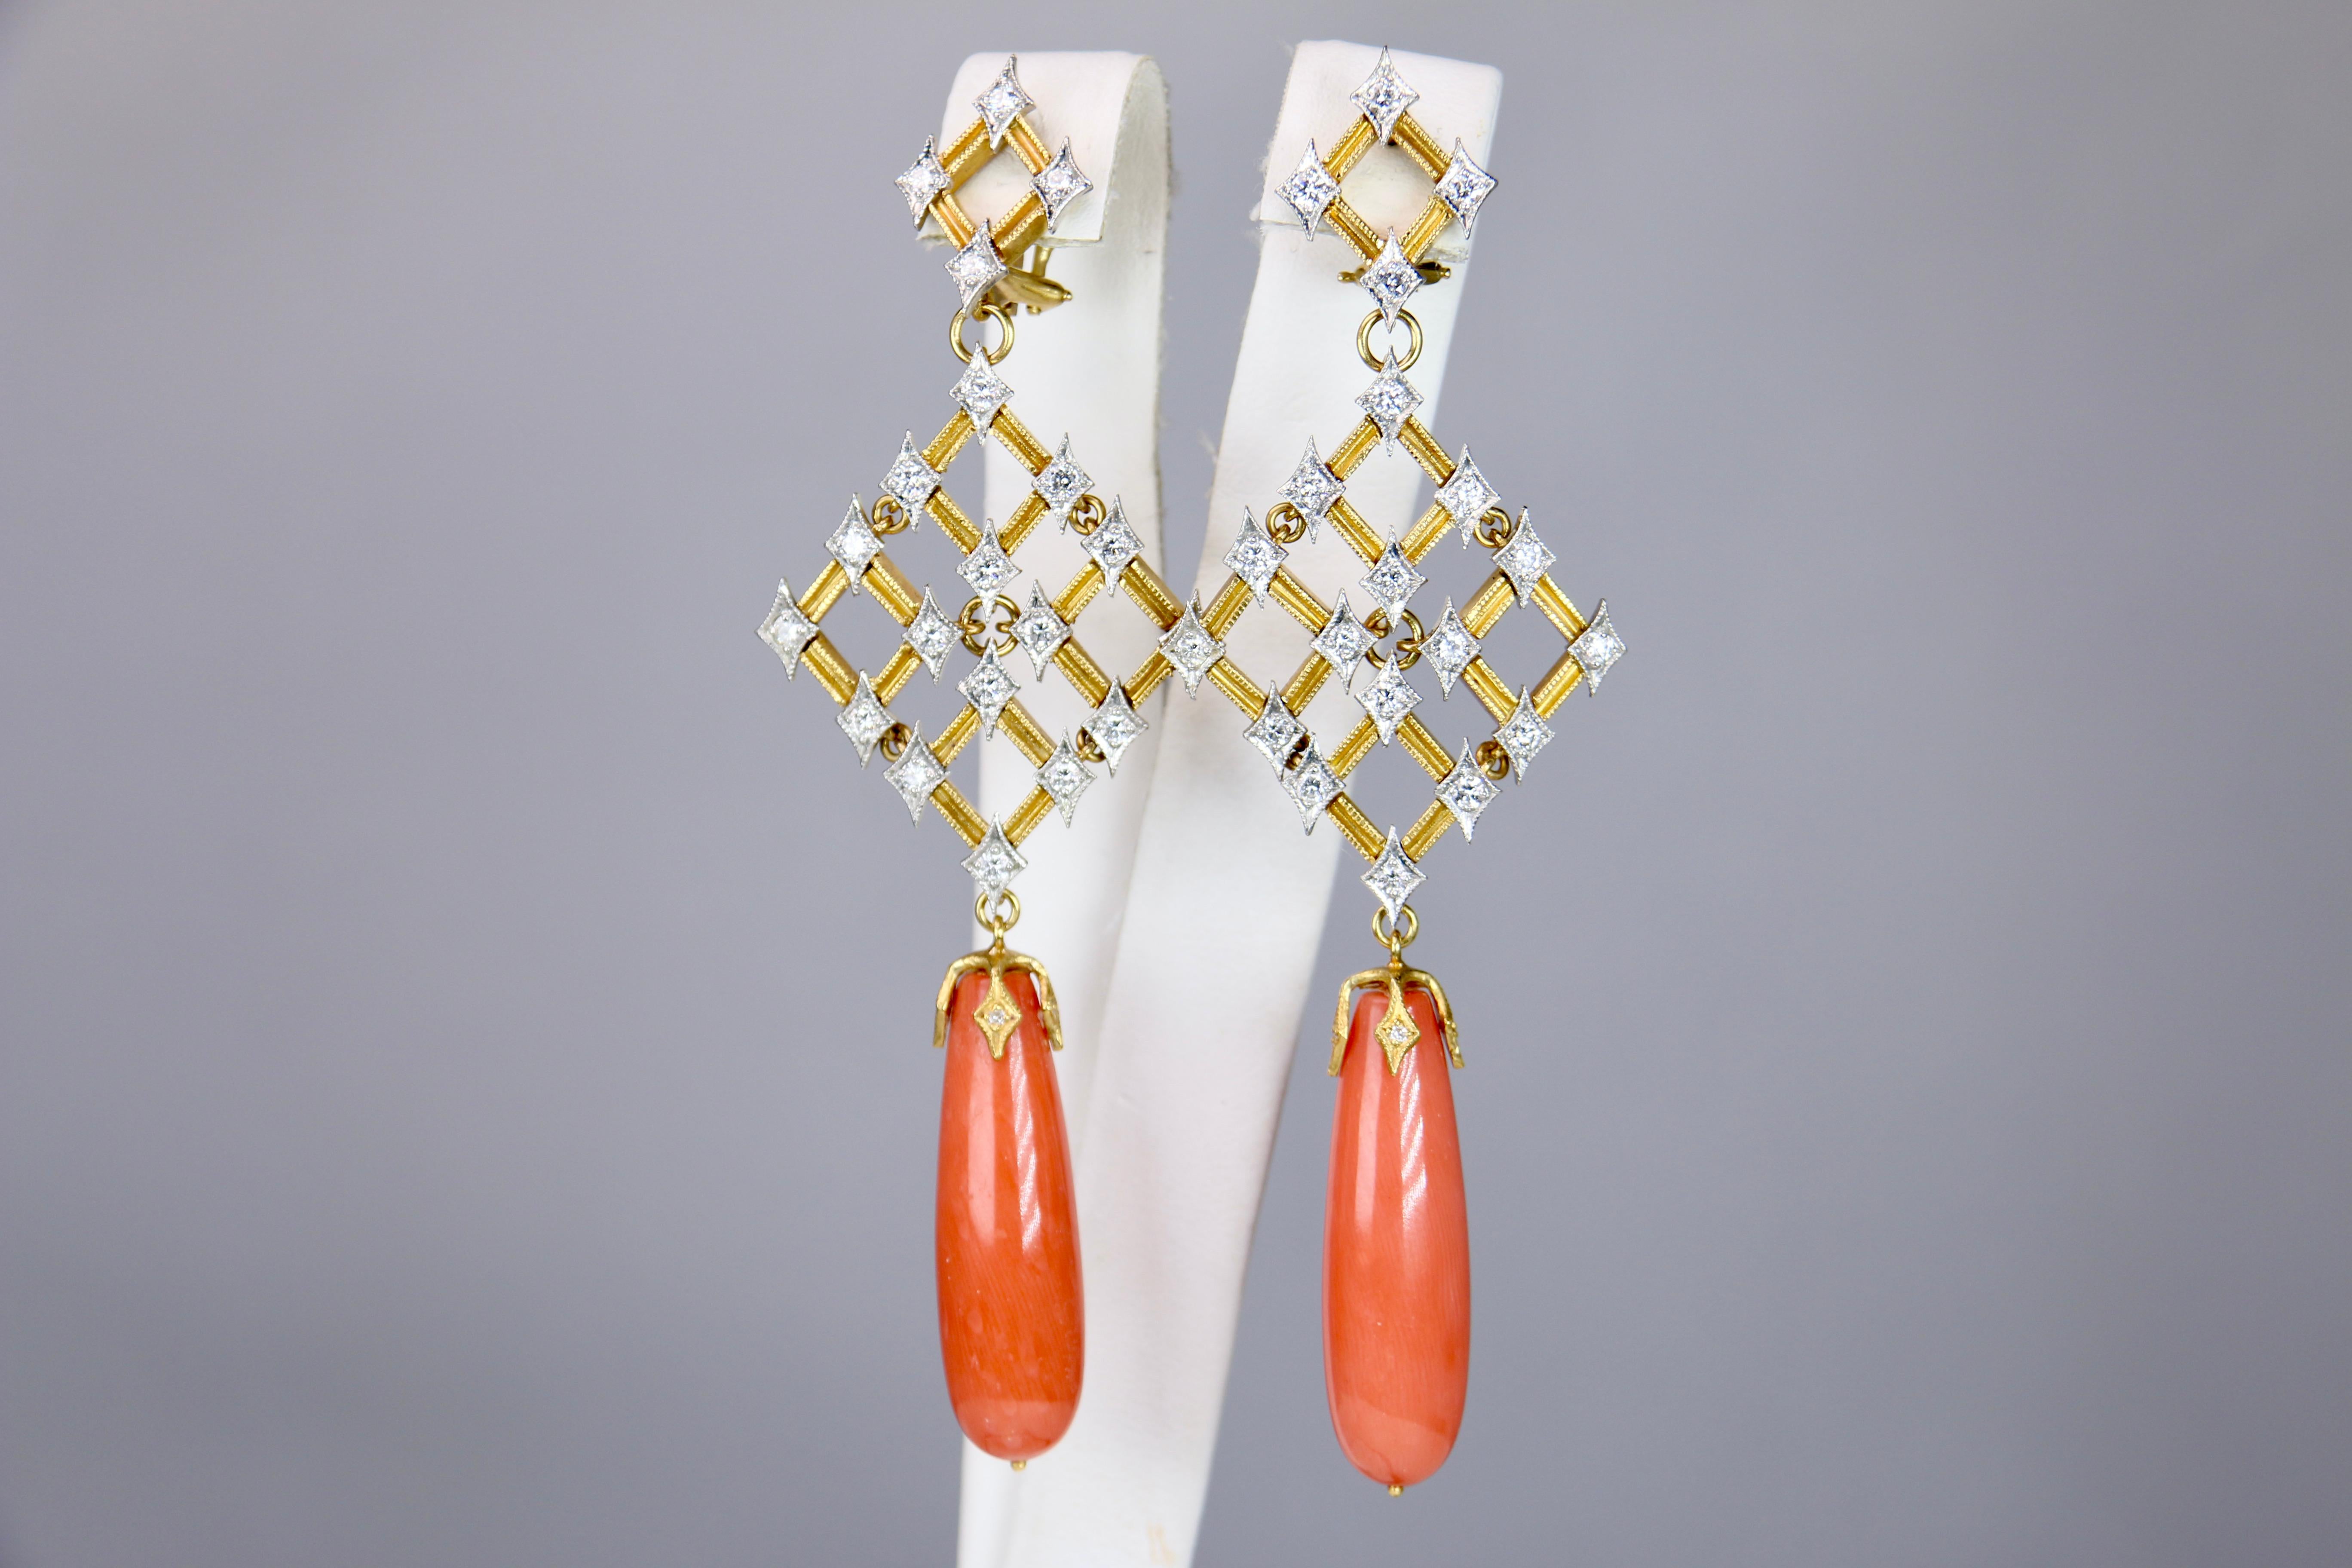 These beautiful 22k Yellow Gold, Platinum, Diamond, and vintage coral dangle earrings from Cathy Waterman are a unique and beautiful piece, perfect for the warmer seasons. Showcasing diamonds and in 22k yellow gold and platinum with the coral